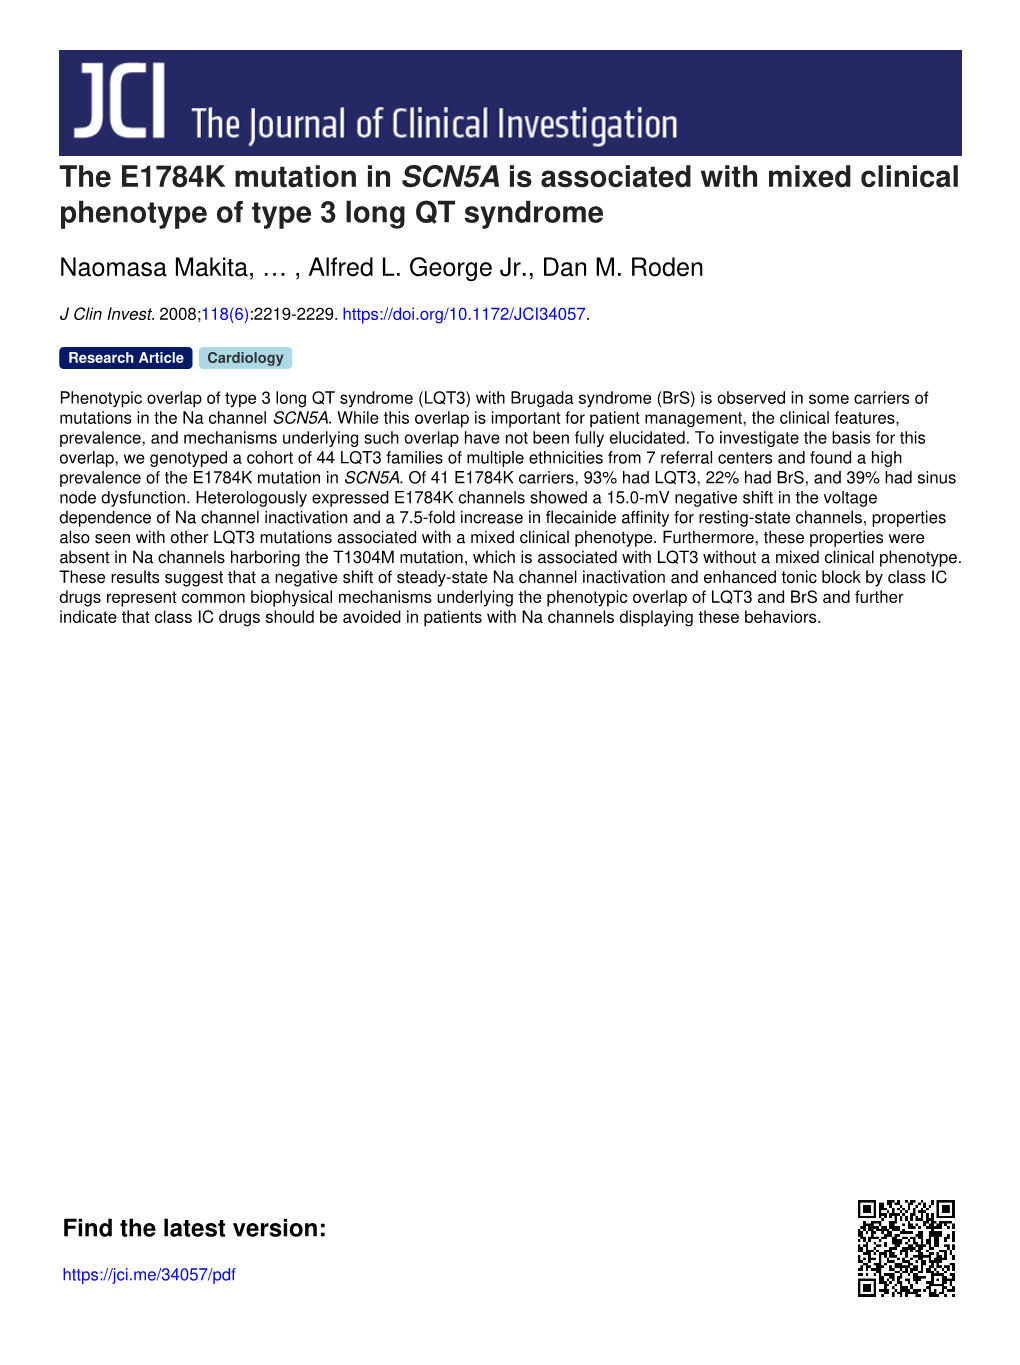 The E1784K Mutation in SCN5A Is Associated with Mixed Clinical Phenotype of Type 3 Long QT Syndrome